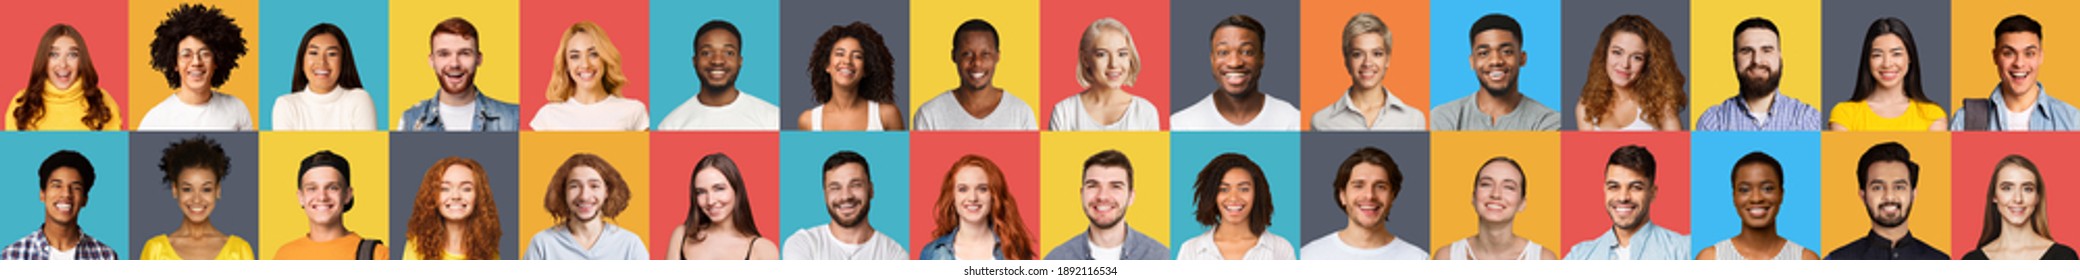 Collage Of Multiethnic Human Portraits With Beautiful Faces Of Real Men And Women Smiling Posing On Different Colorful Backgrounds. Panorama. Variety And Diversity Of Modern Society Concept - Shutterstock ID 1892116534